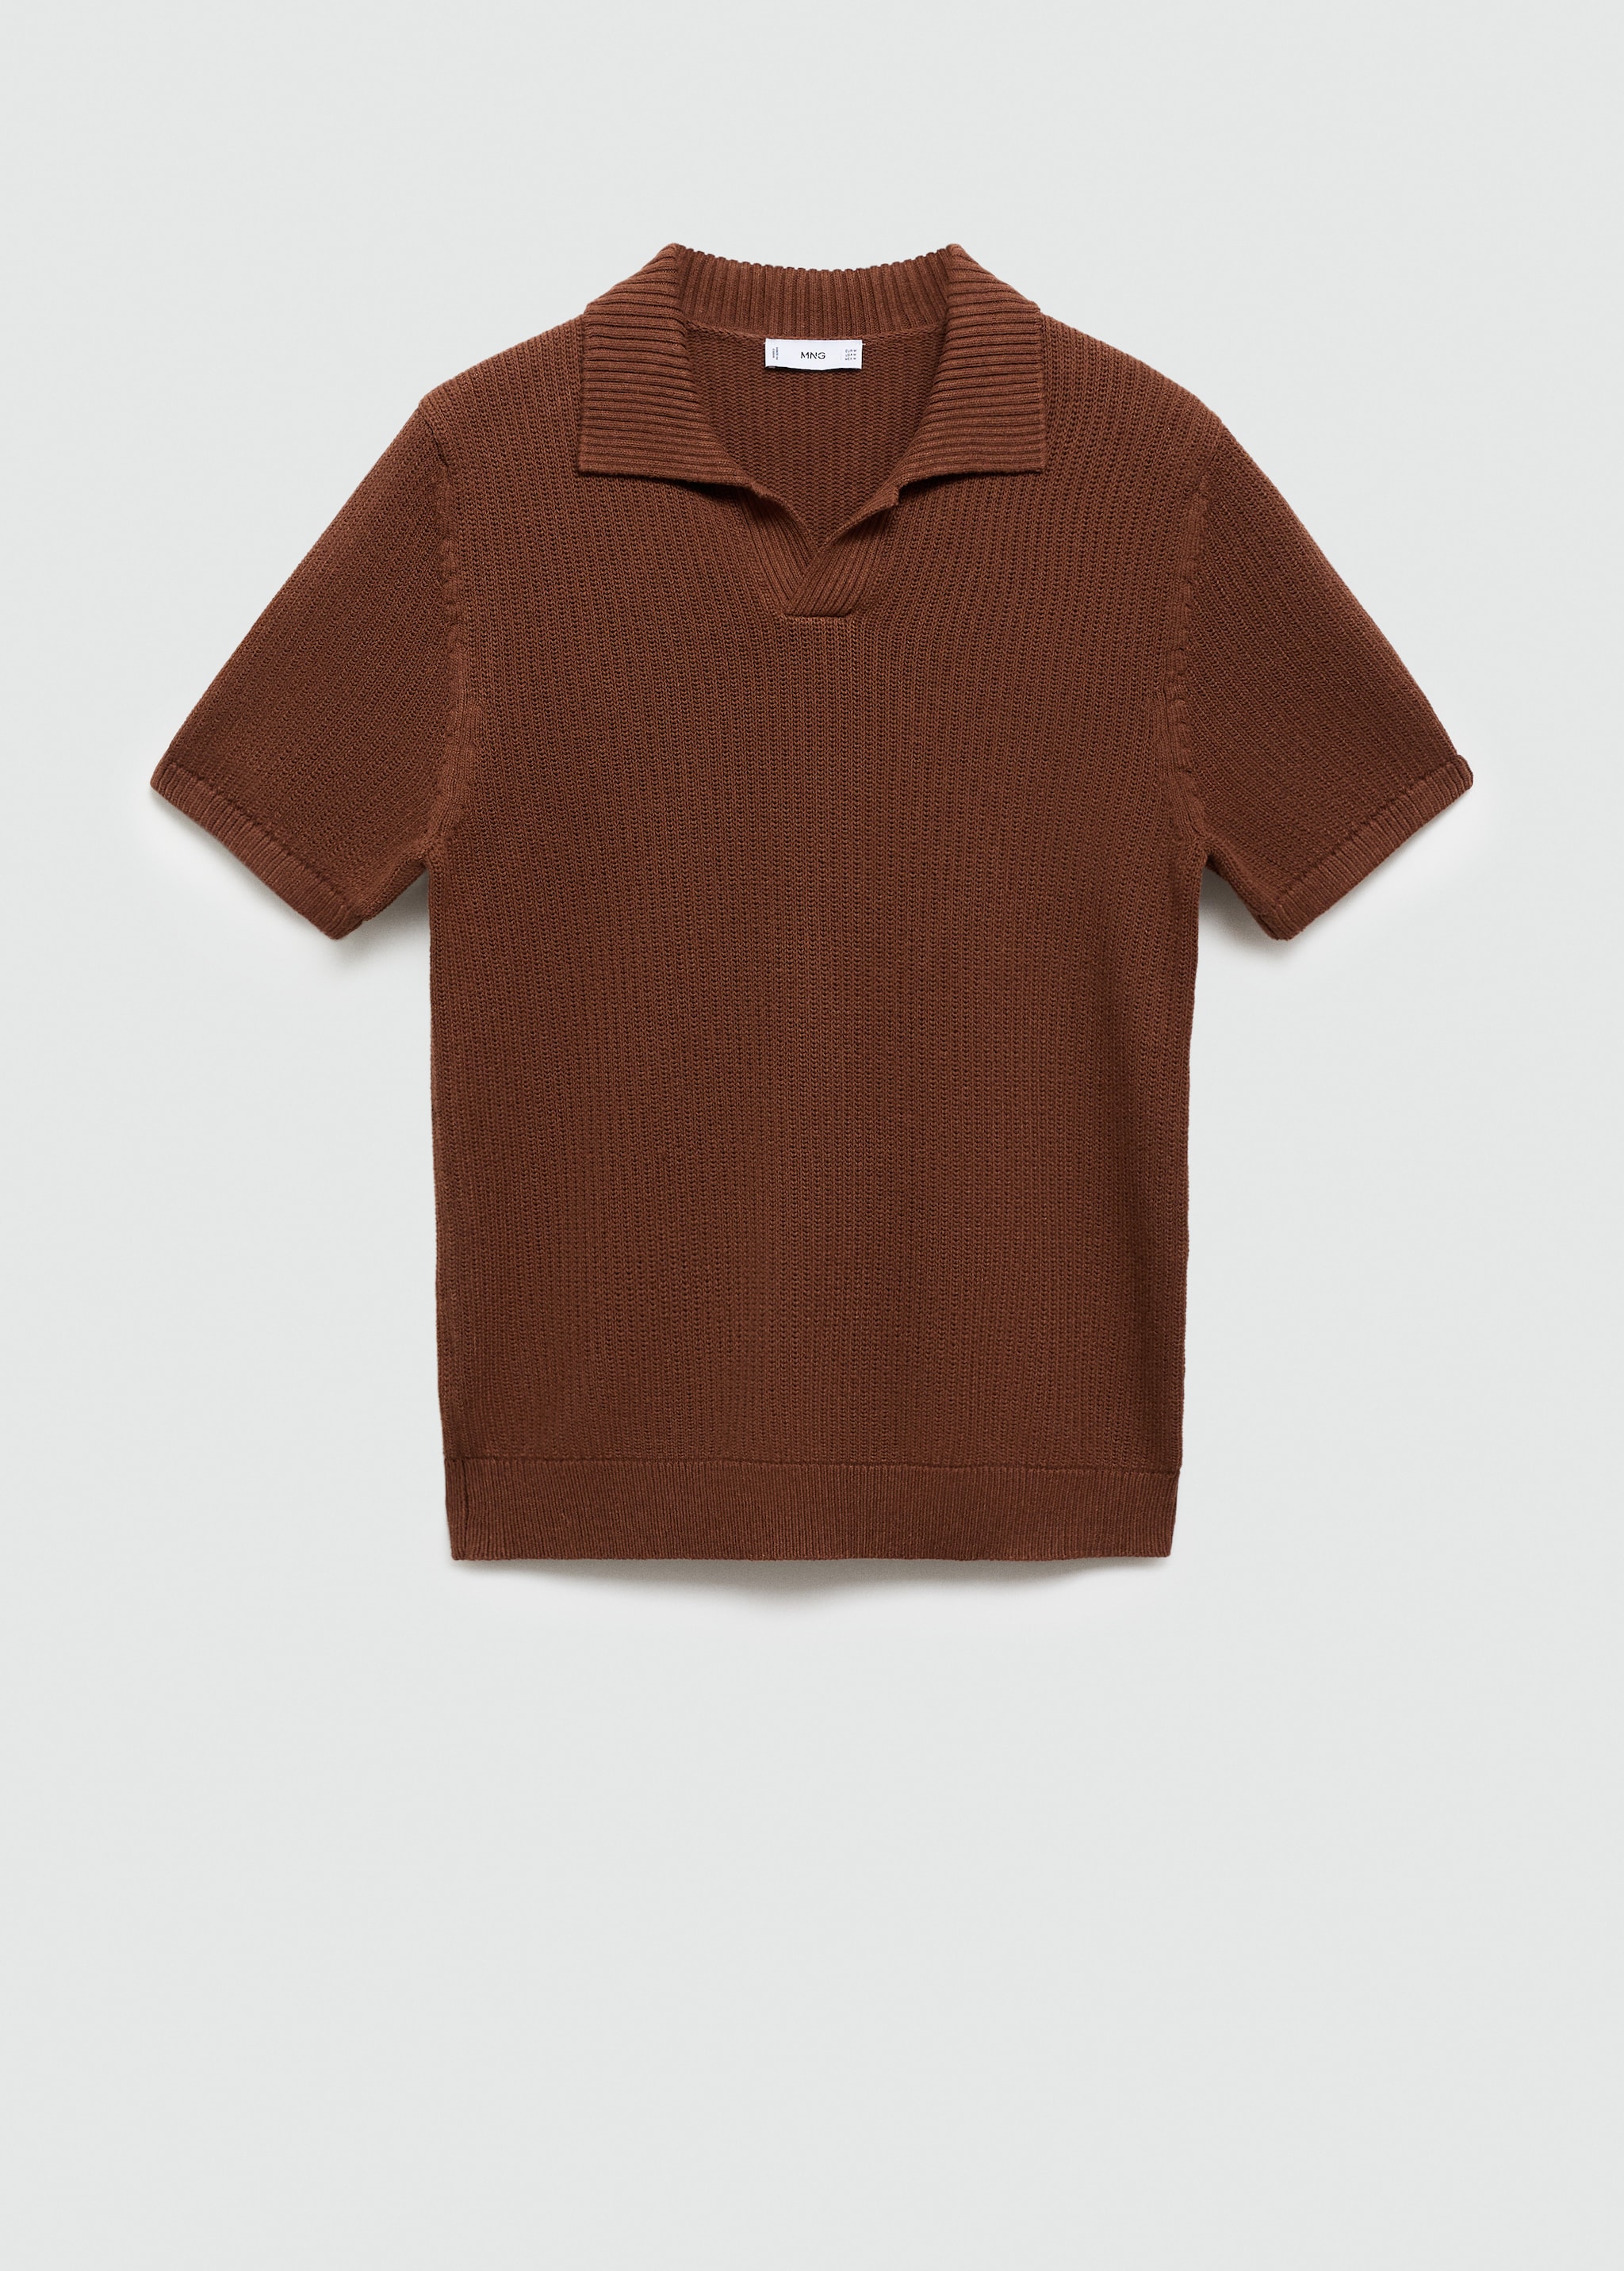 Ribbed knit polo shirt - Article without model